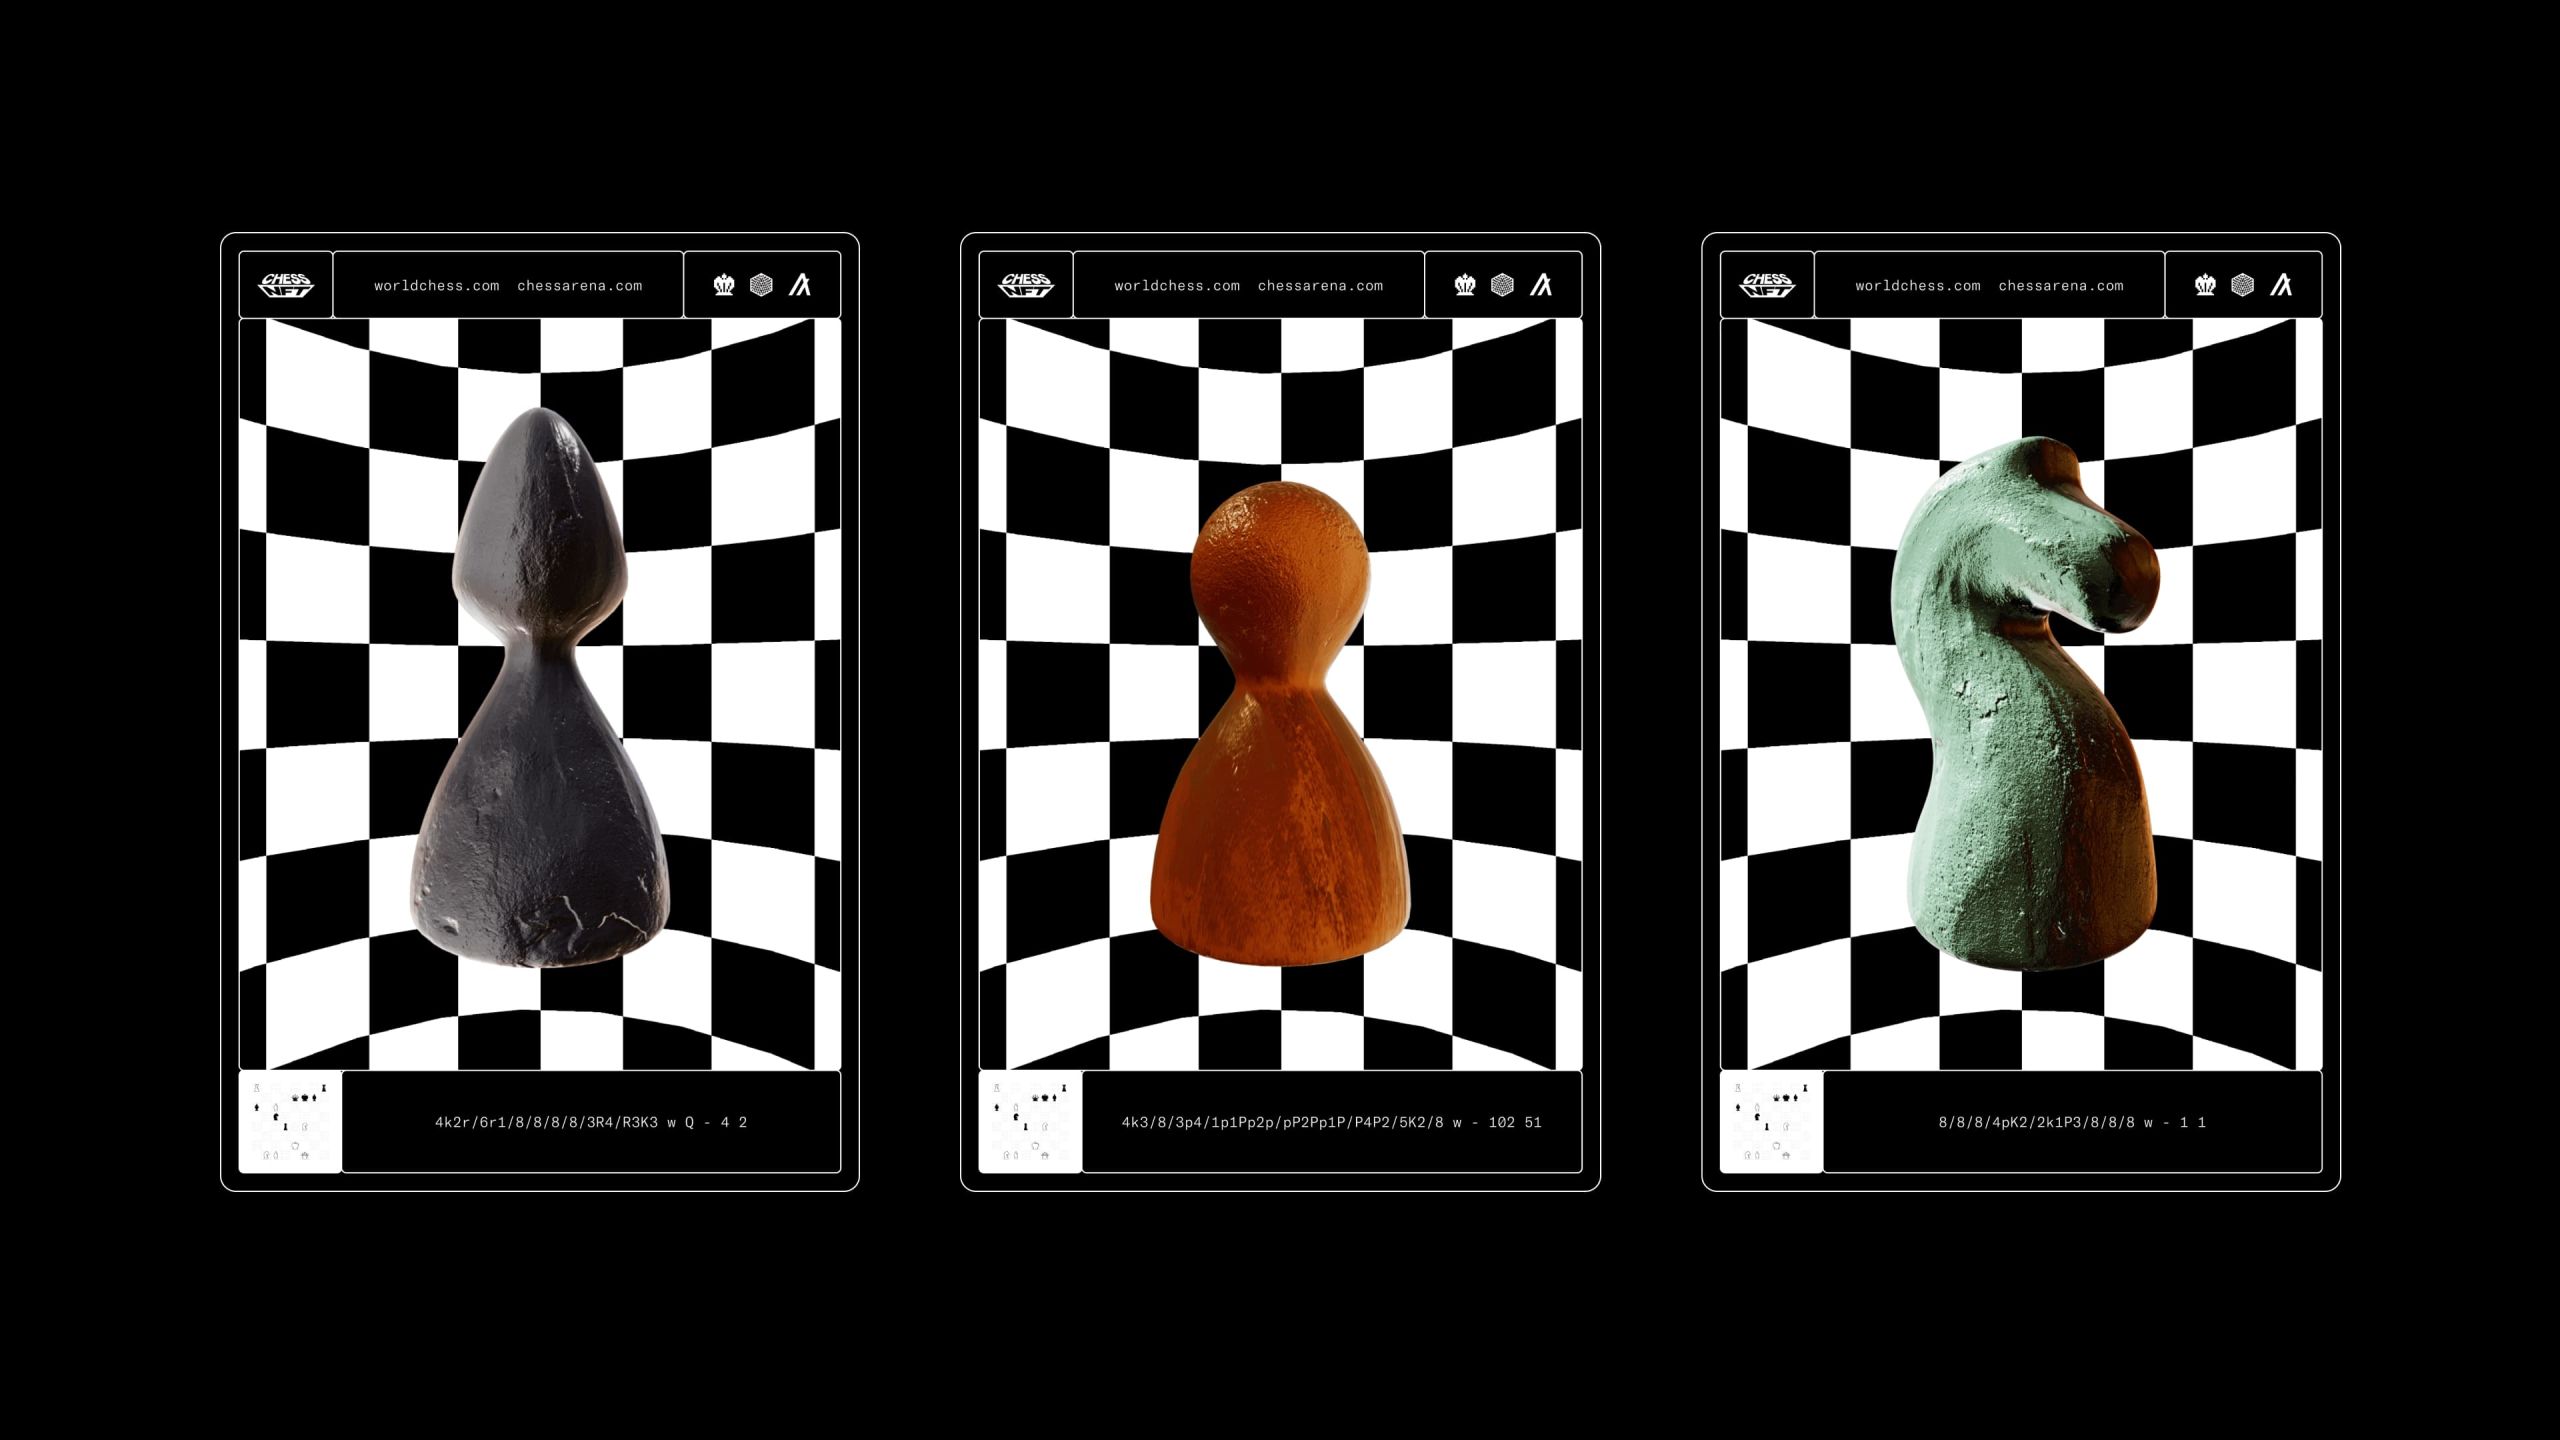 GameStopNFT on X: Play, trade, and own beautiful NFT chess pieces